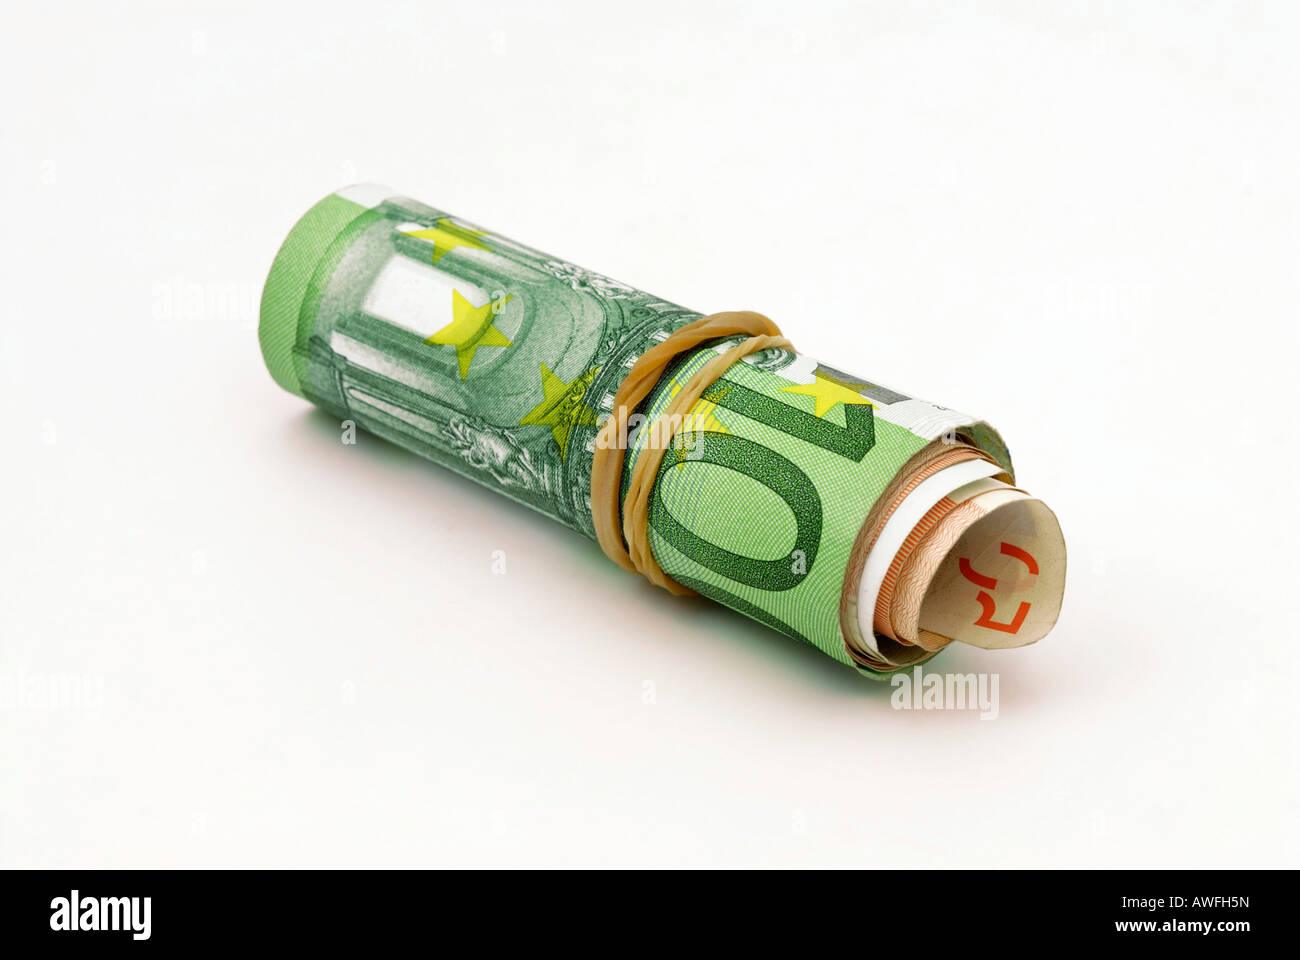 Euro bills rolled up, held together with an elastic Stock Photo